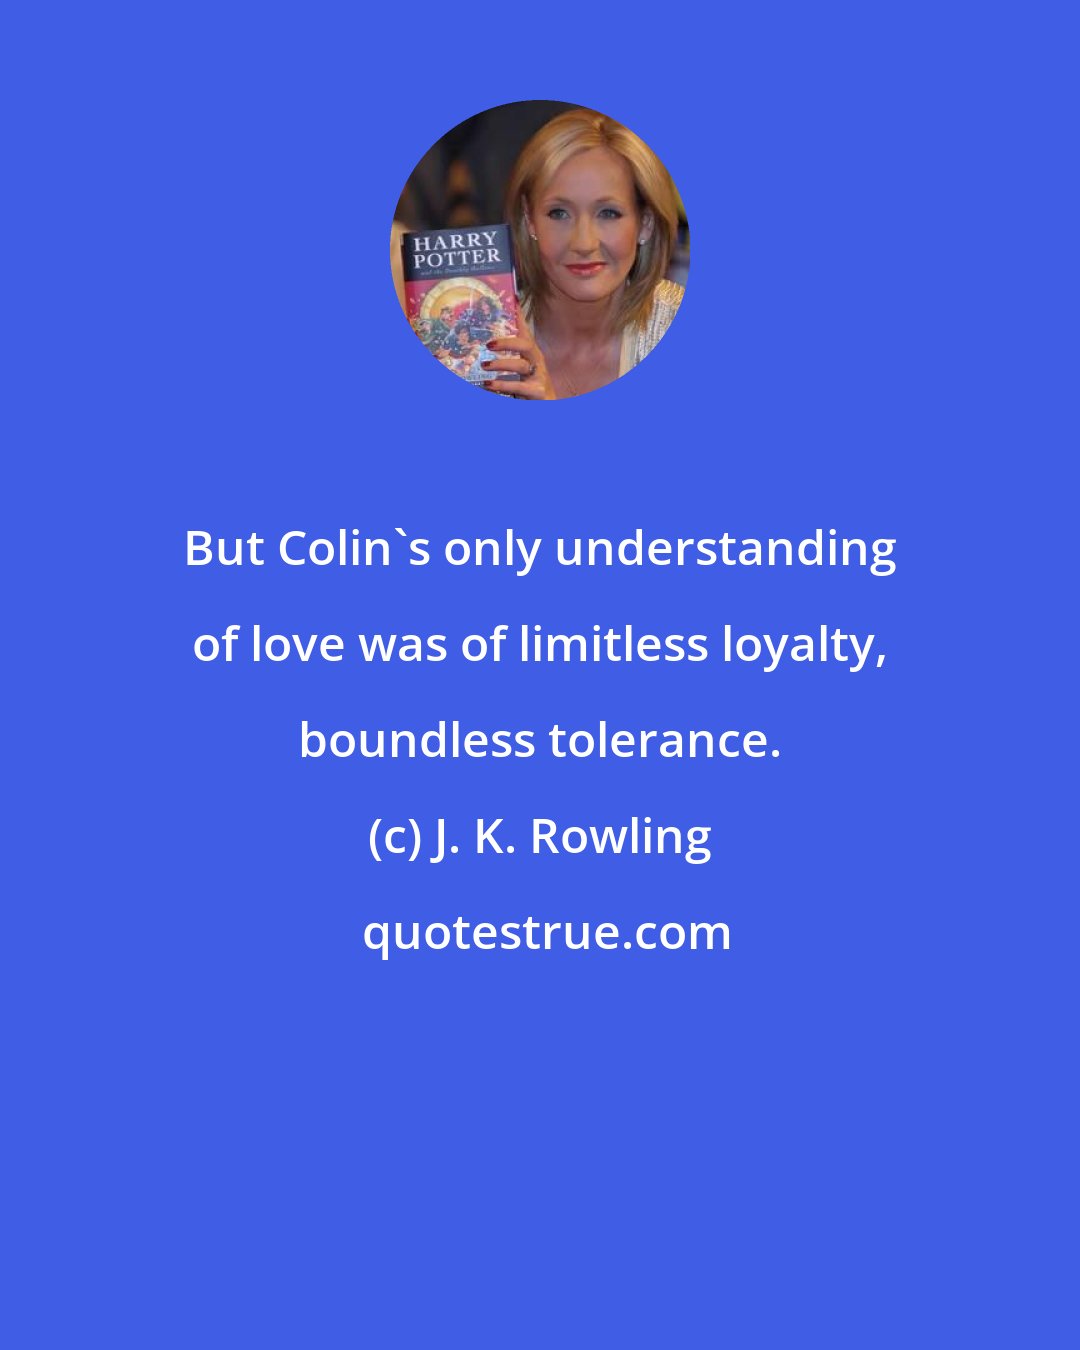 J. K. Rowling: But Colin's only understanding of love was of limitless loyalty, boundless tolerance.